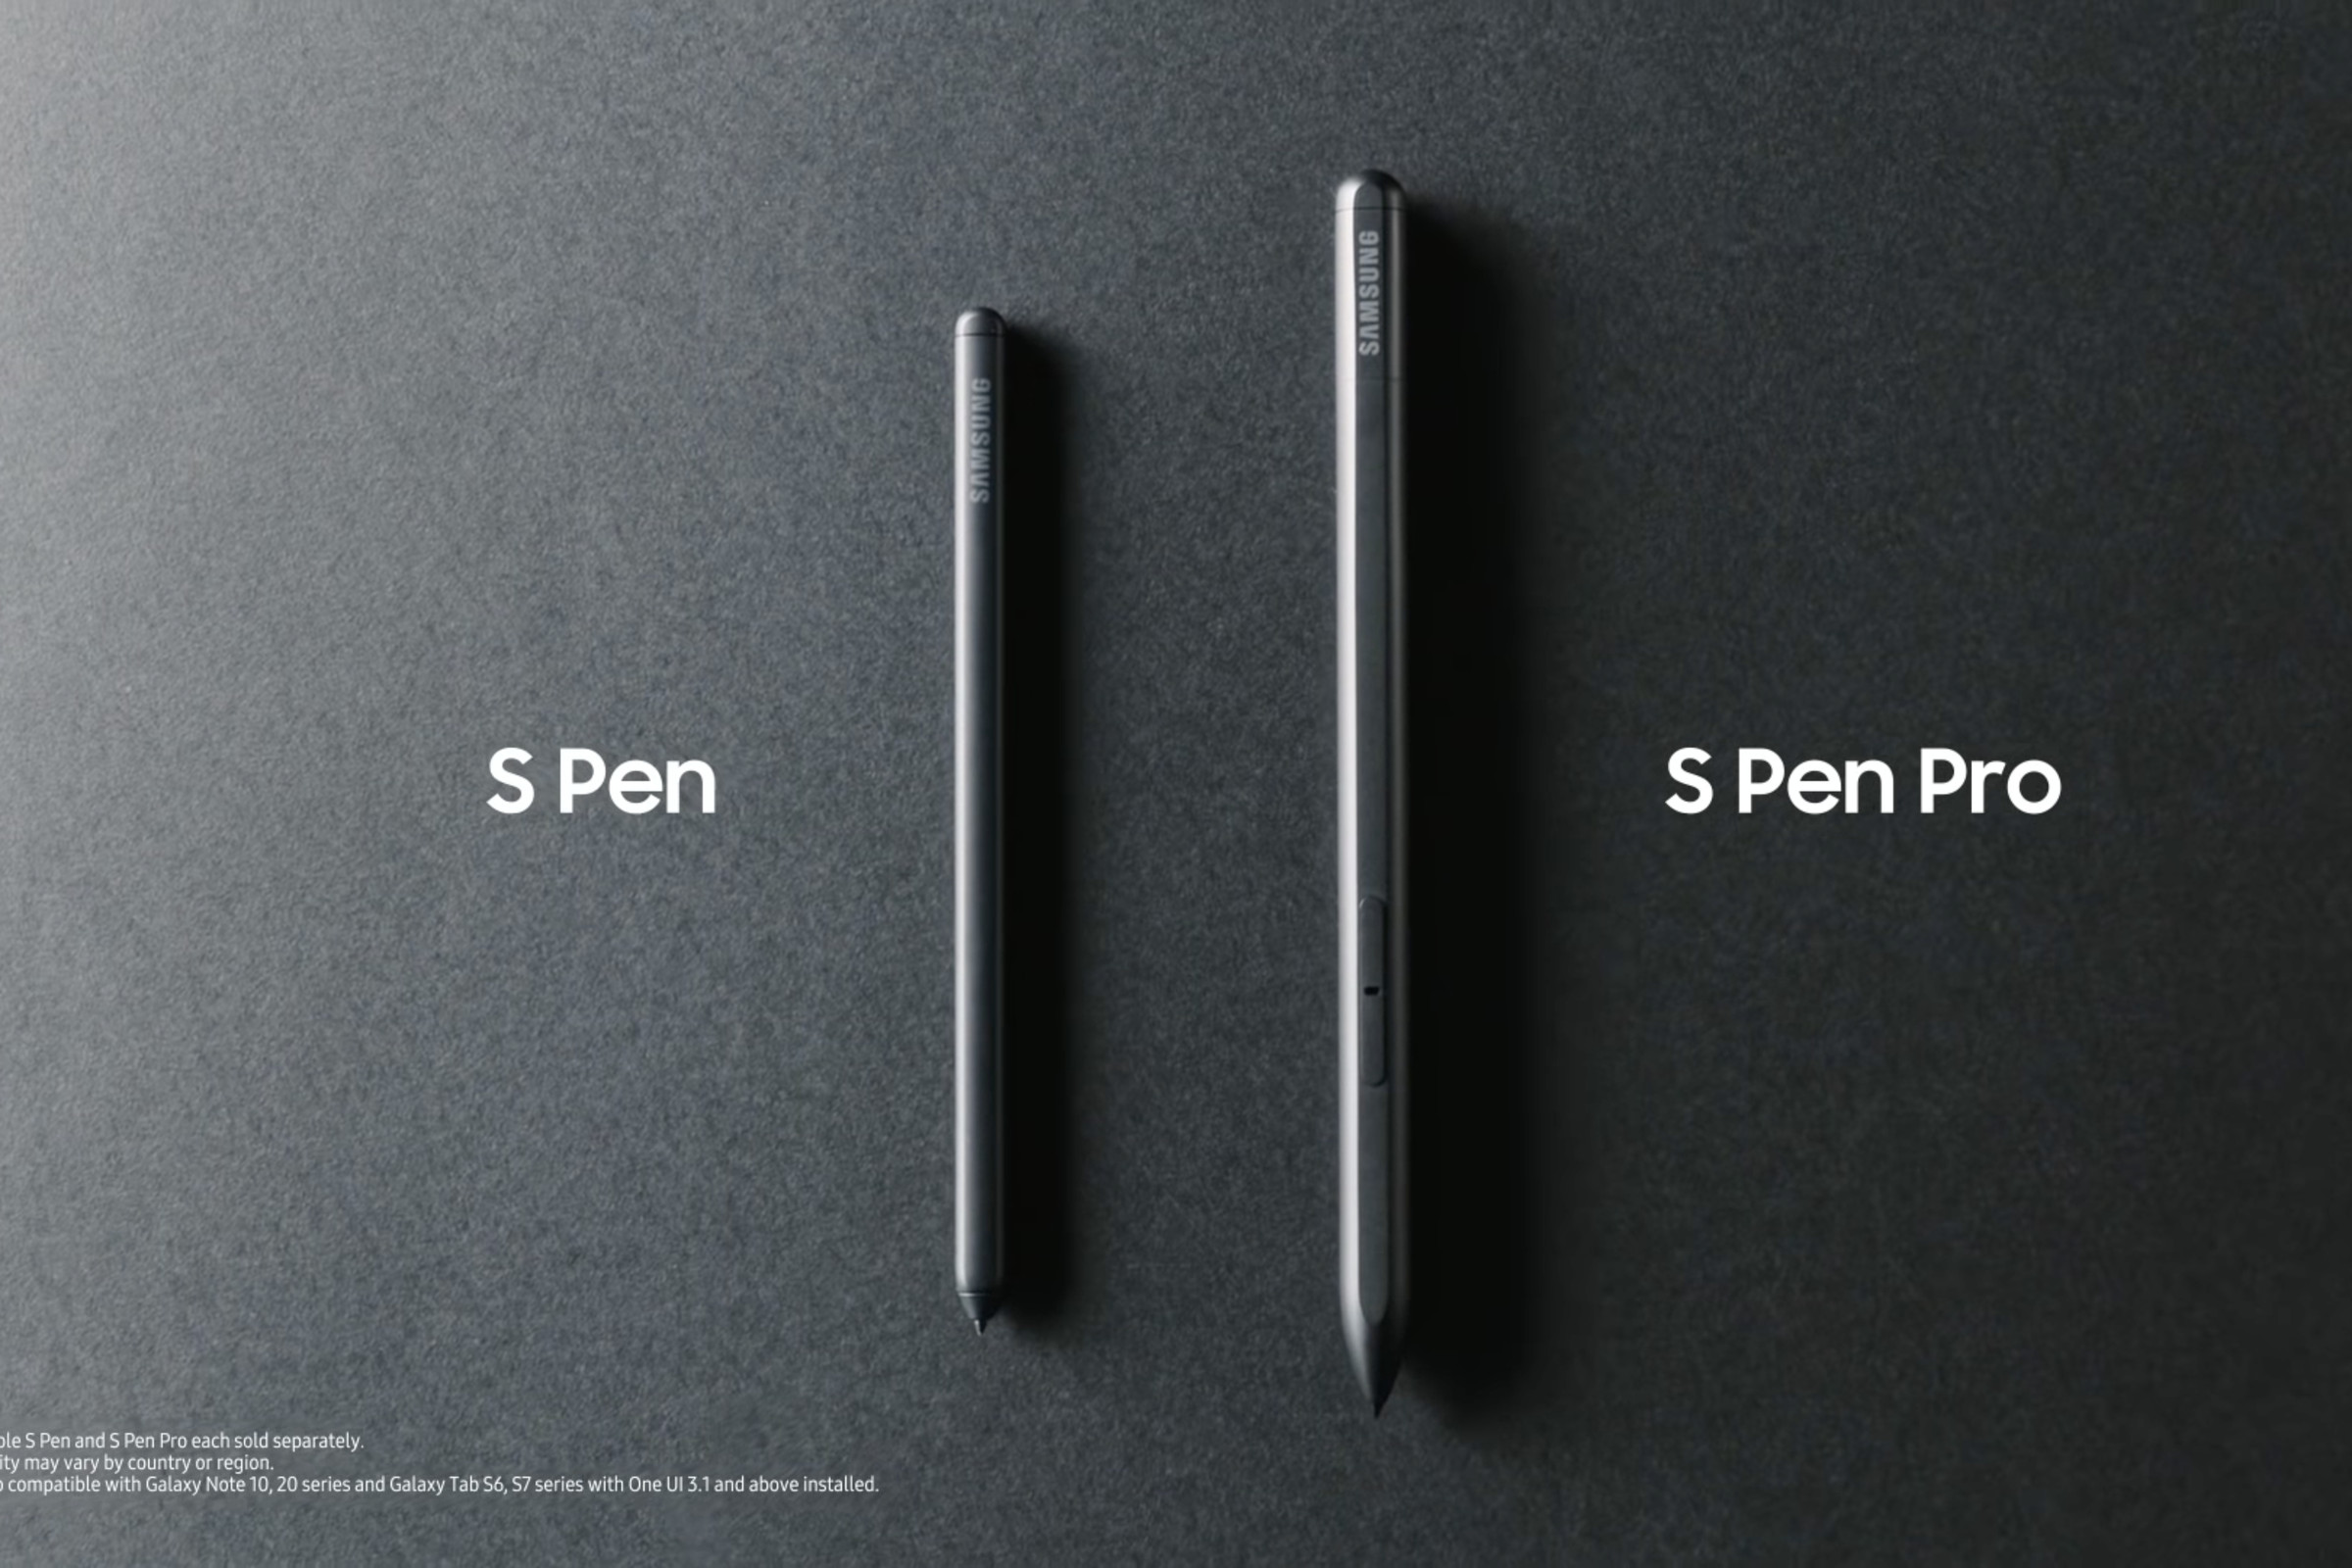 Samsung’s S Pen and S Pen Pro.